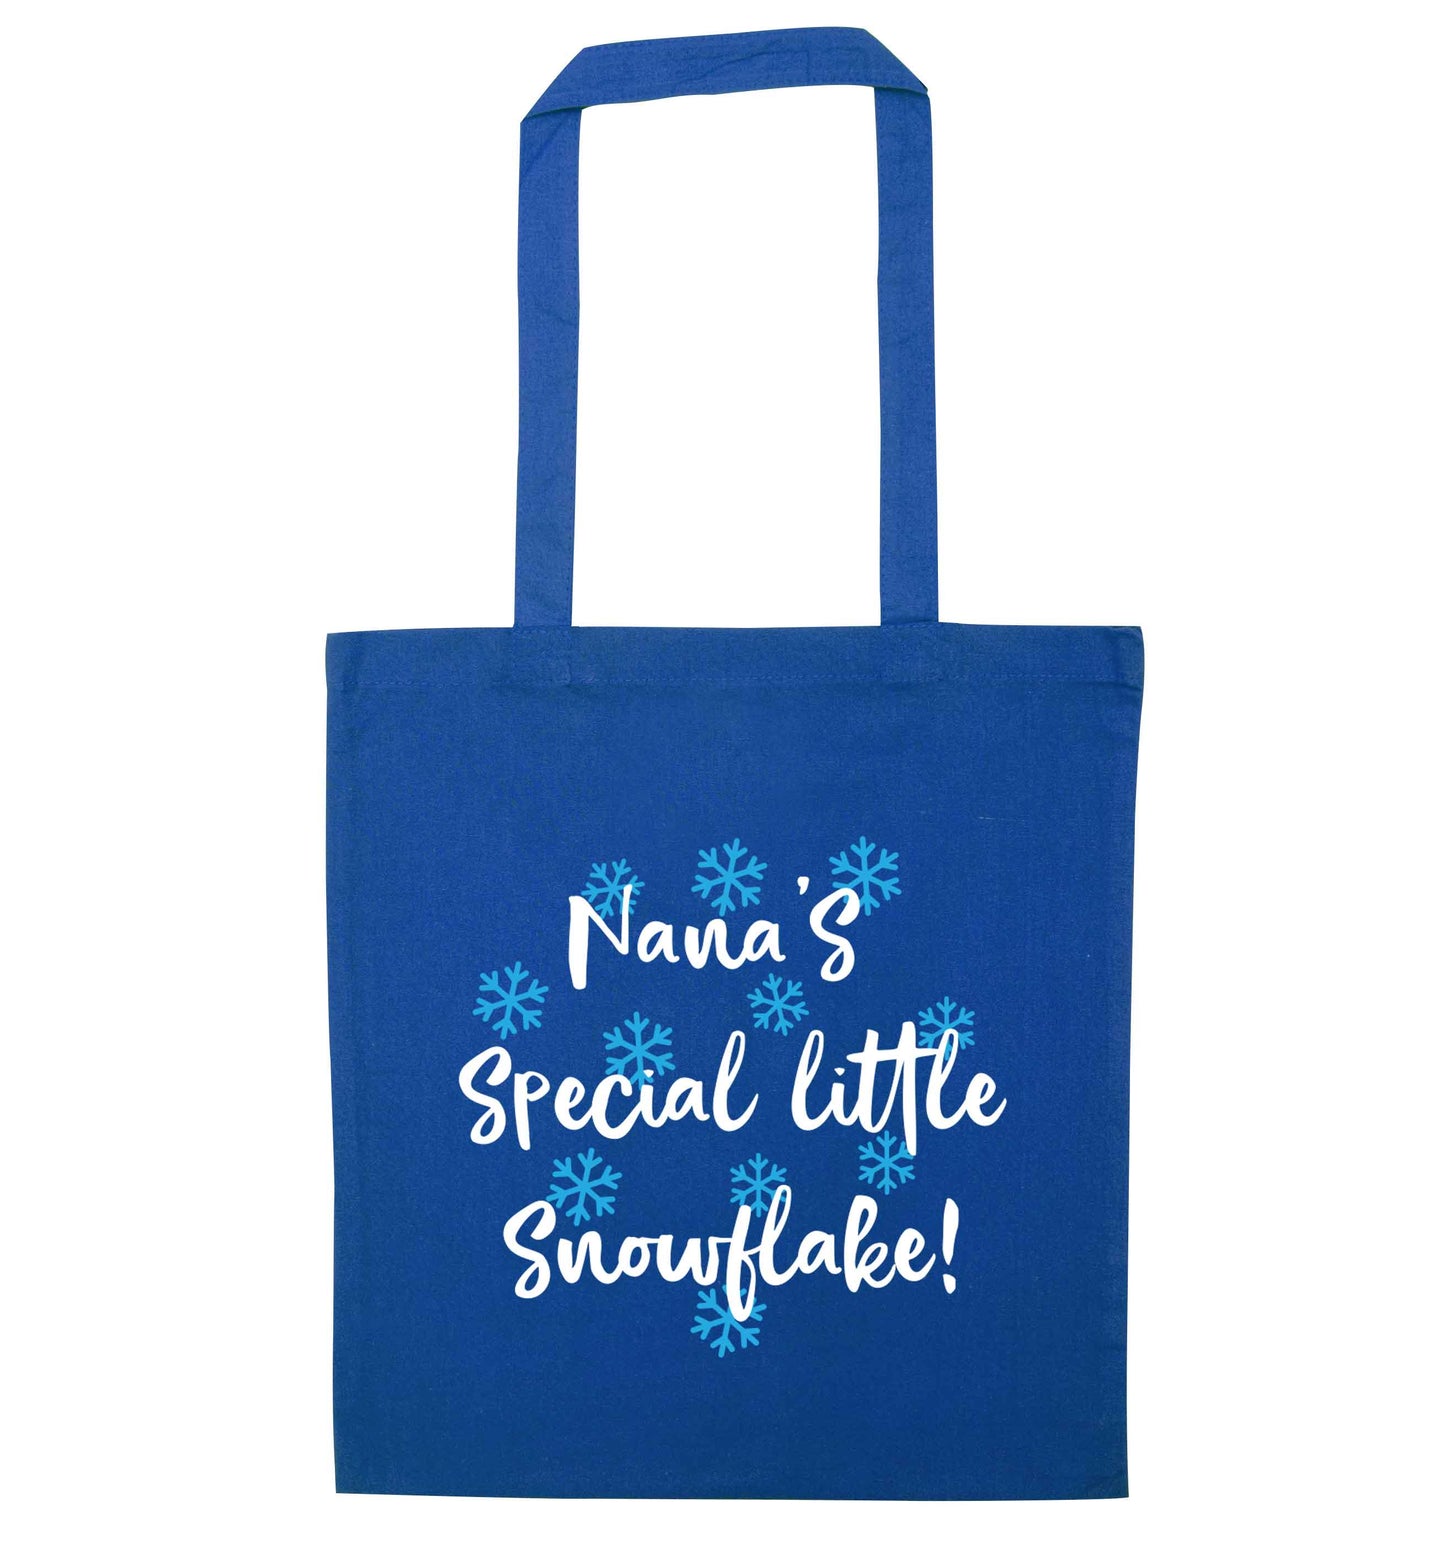 Nana's special little snowflake blue tote bag